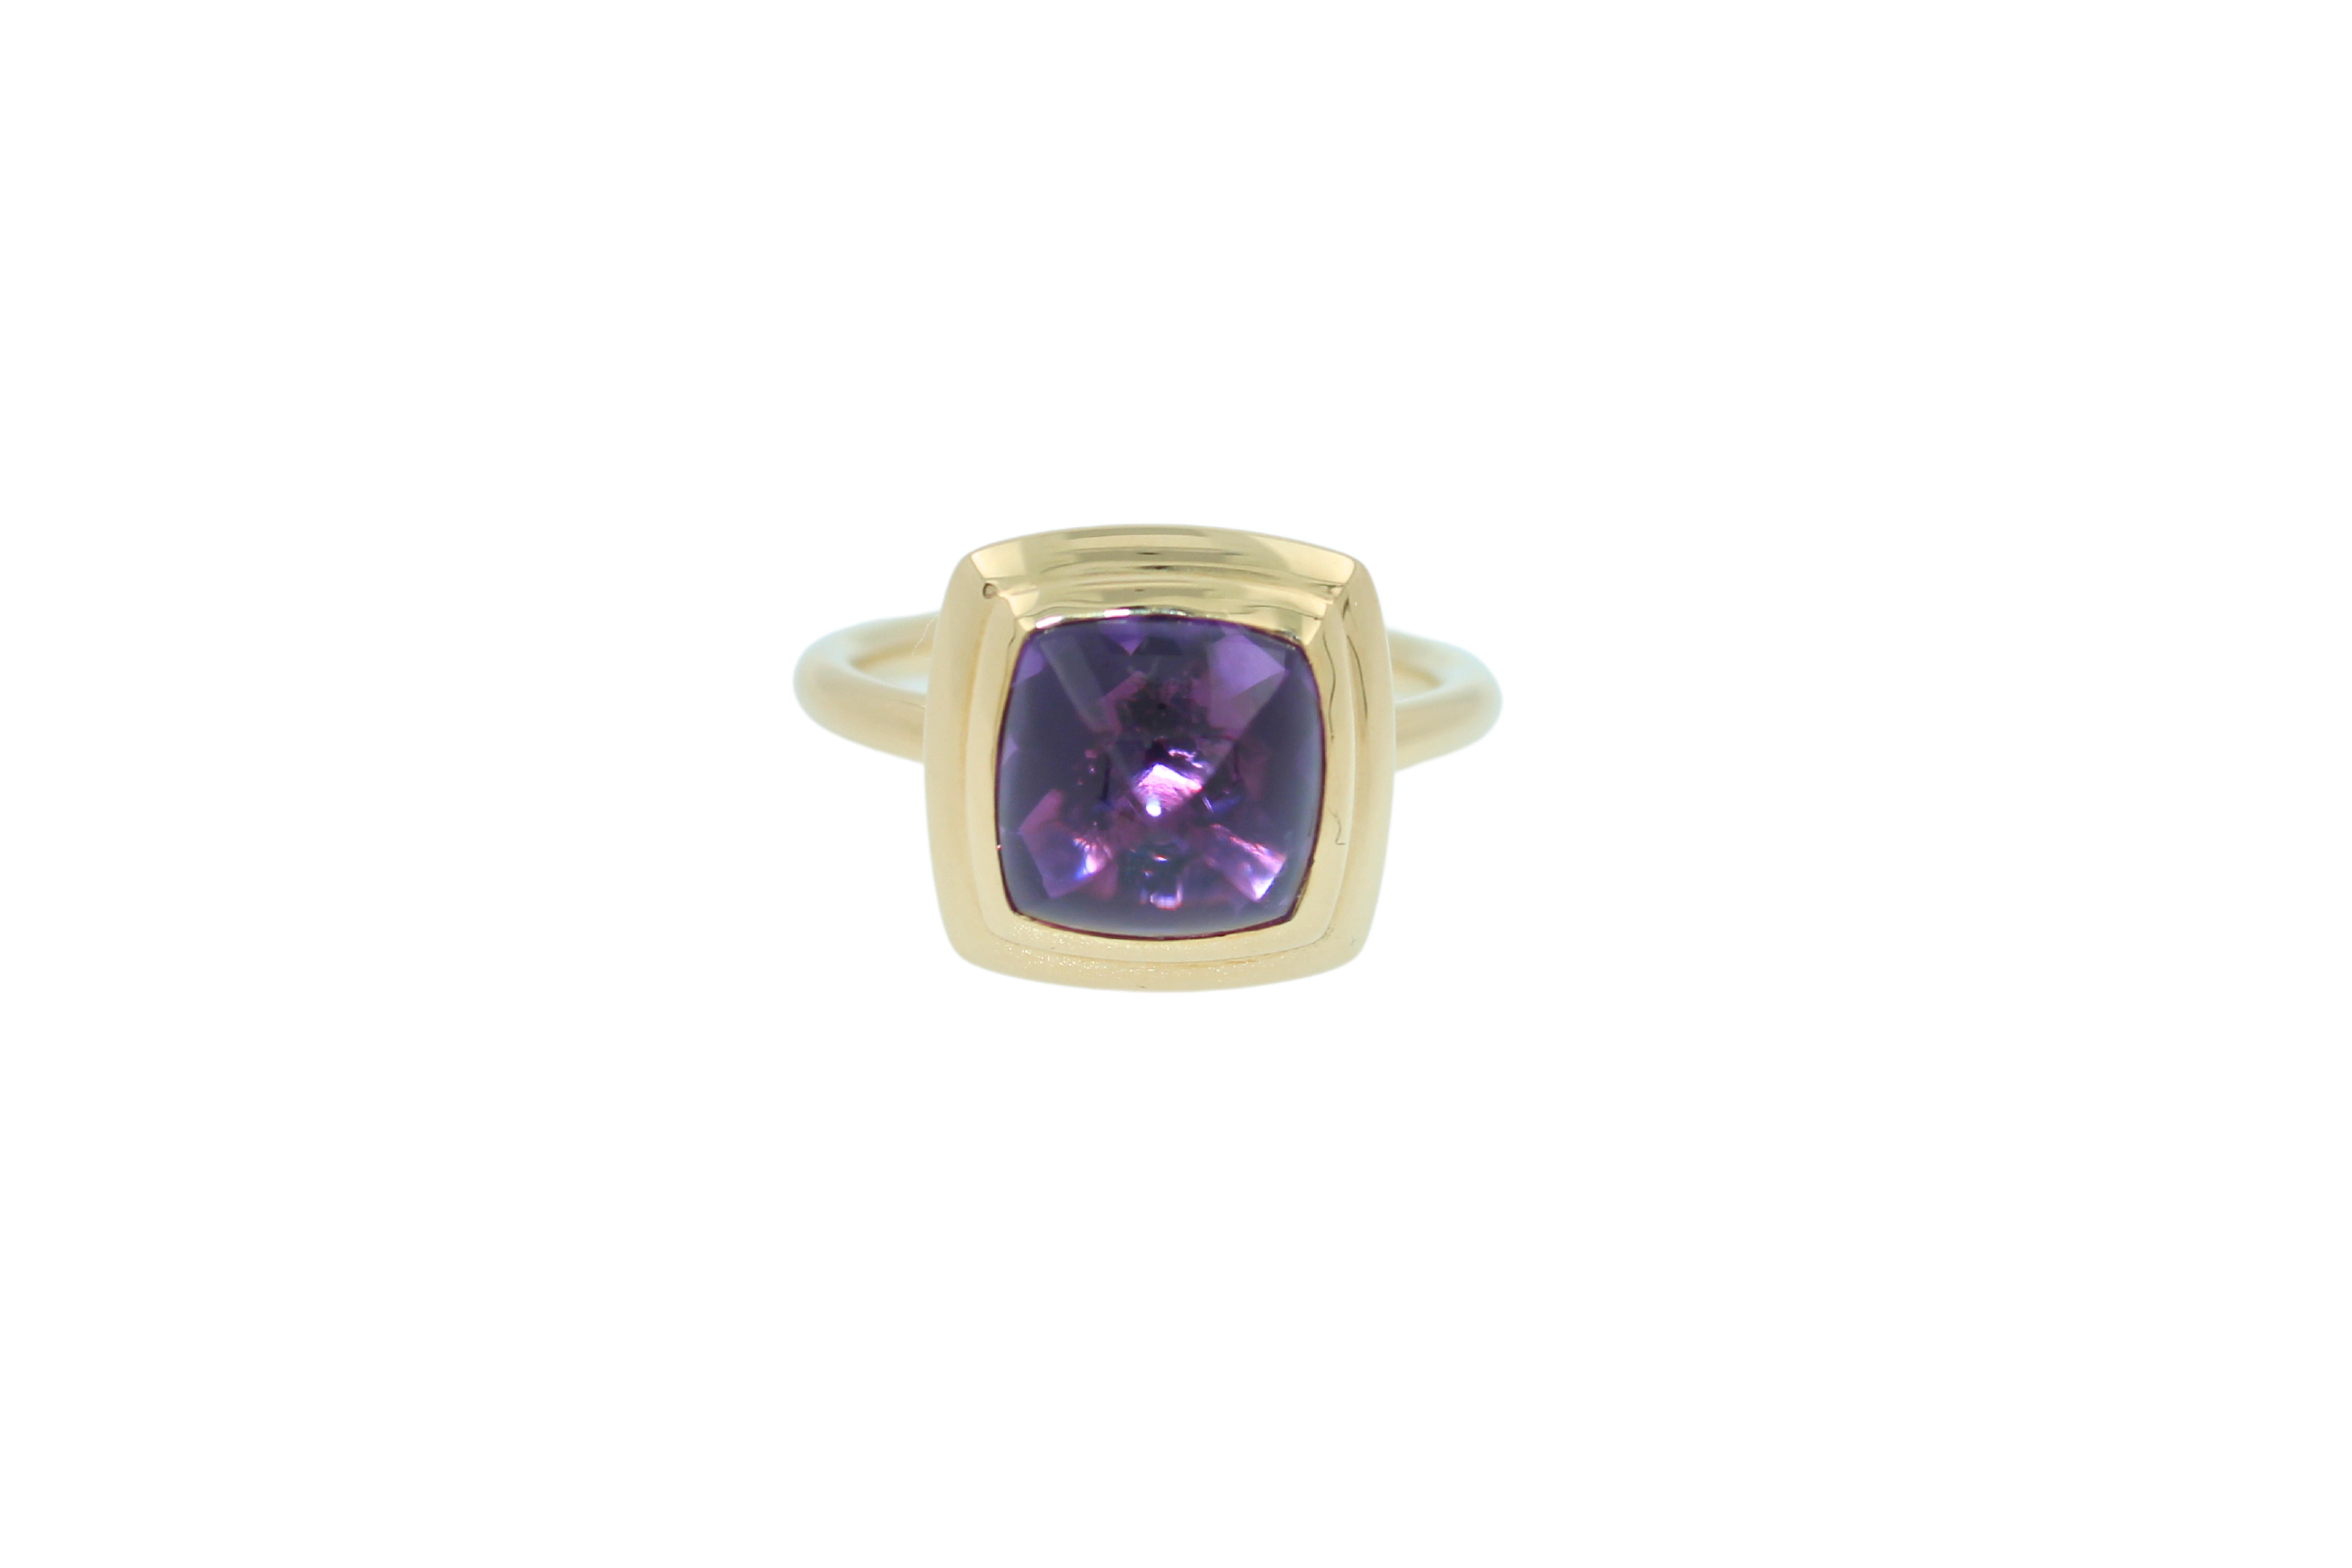 18 Karat Yellow Gold
4.00 cts Amethyst Sugarloaf Cabochon Cut
Beautiful, Unique & Rare - Custom Cut Gemstone Shape
Dark Purple Violet Hues and Shades of a High Quality Amethyst
Comfortable and solid 18K Gold Make - Closed Solid Gold Back
Size 7 -